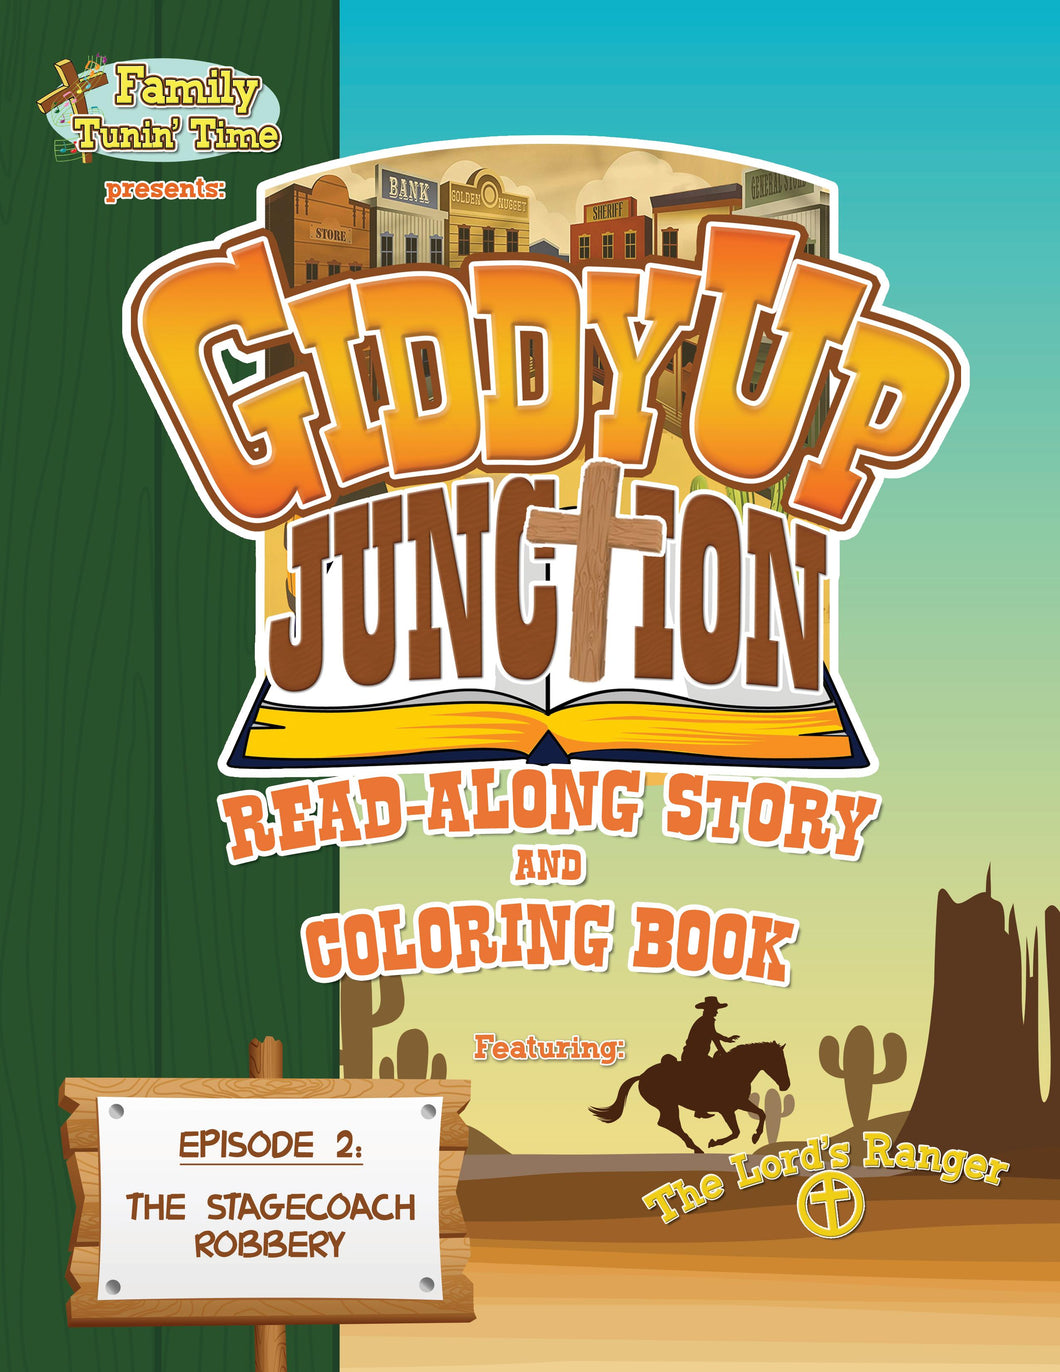 Giddy Up Junction Episode 2: The Stagecoach Robbery